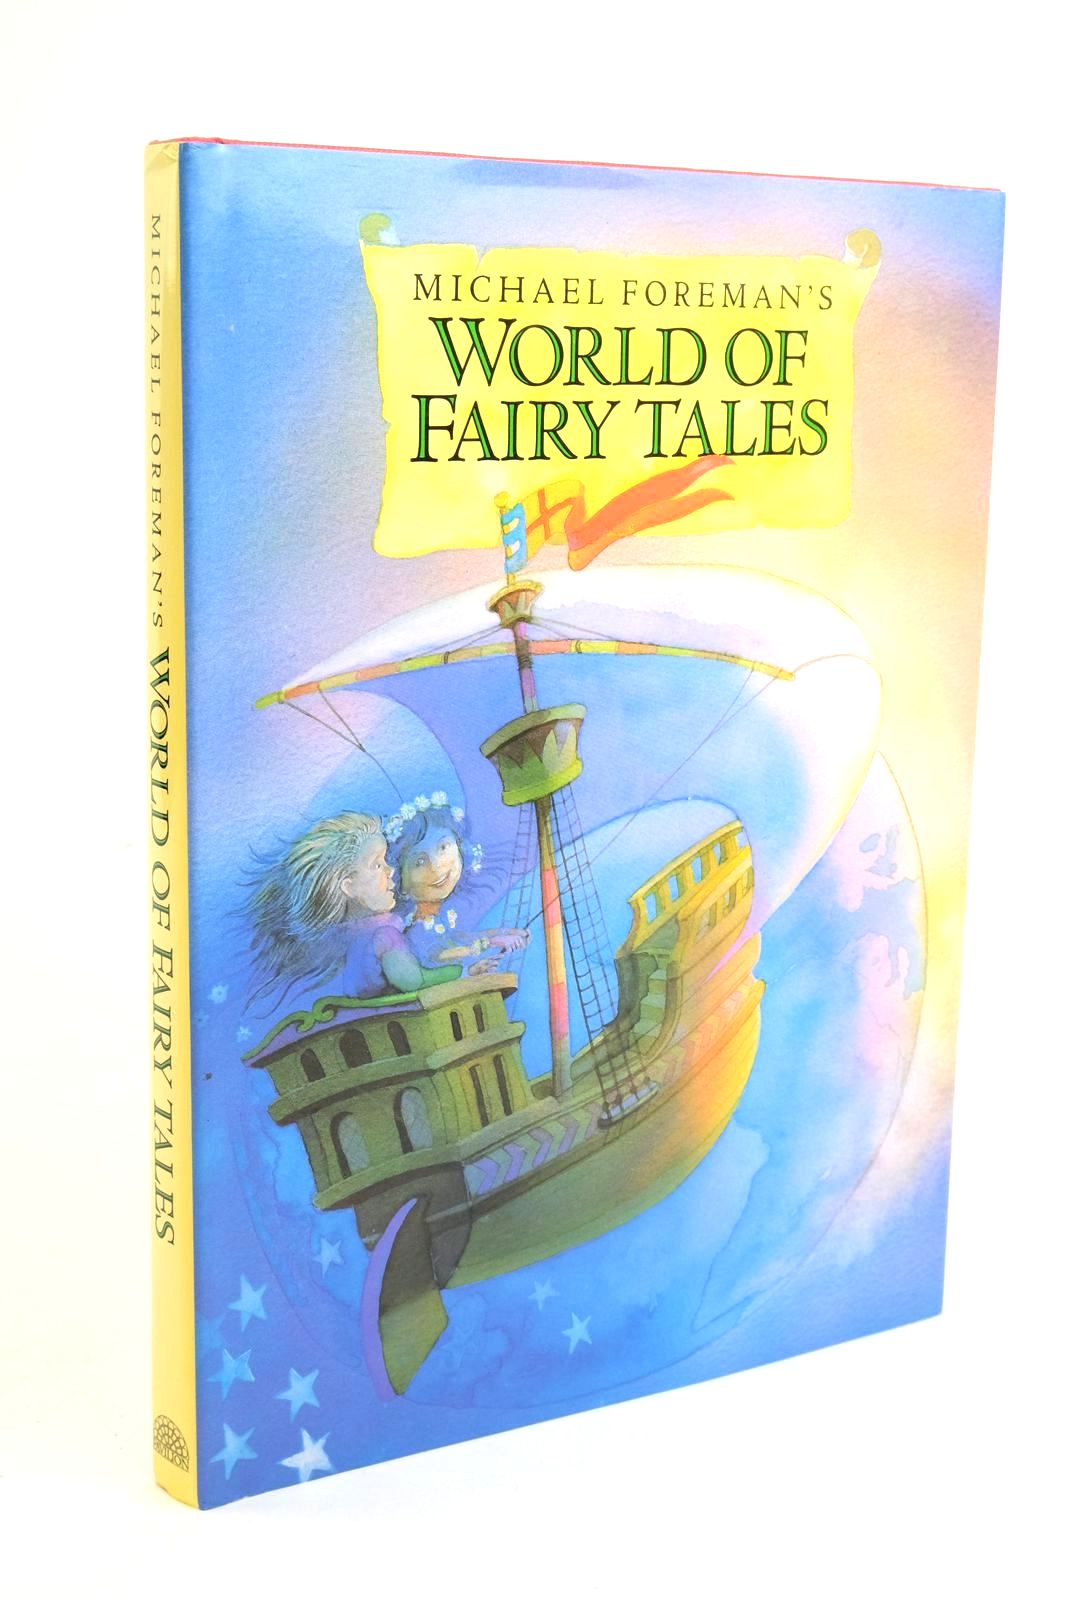 Photo of MICHAEL FOREMAN'S WORLD OF FAIRY TALES written by Foreman, Michael illustrated by Foreman, Michael published by Pavilion Books Ltd. (STOCK CODE: 1322244)  for sale by Stella & Rose's Books